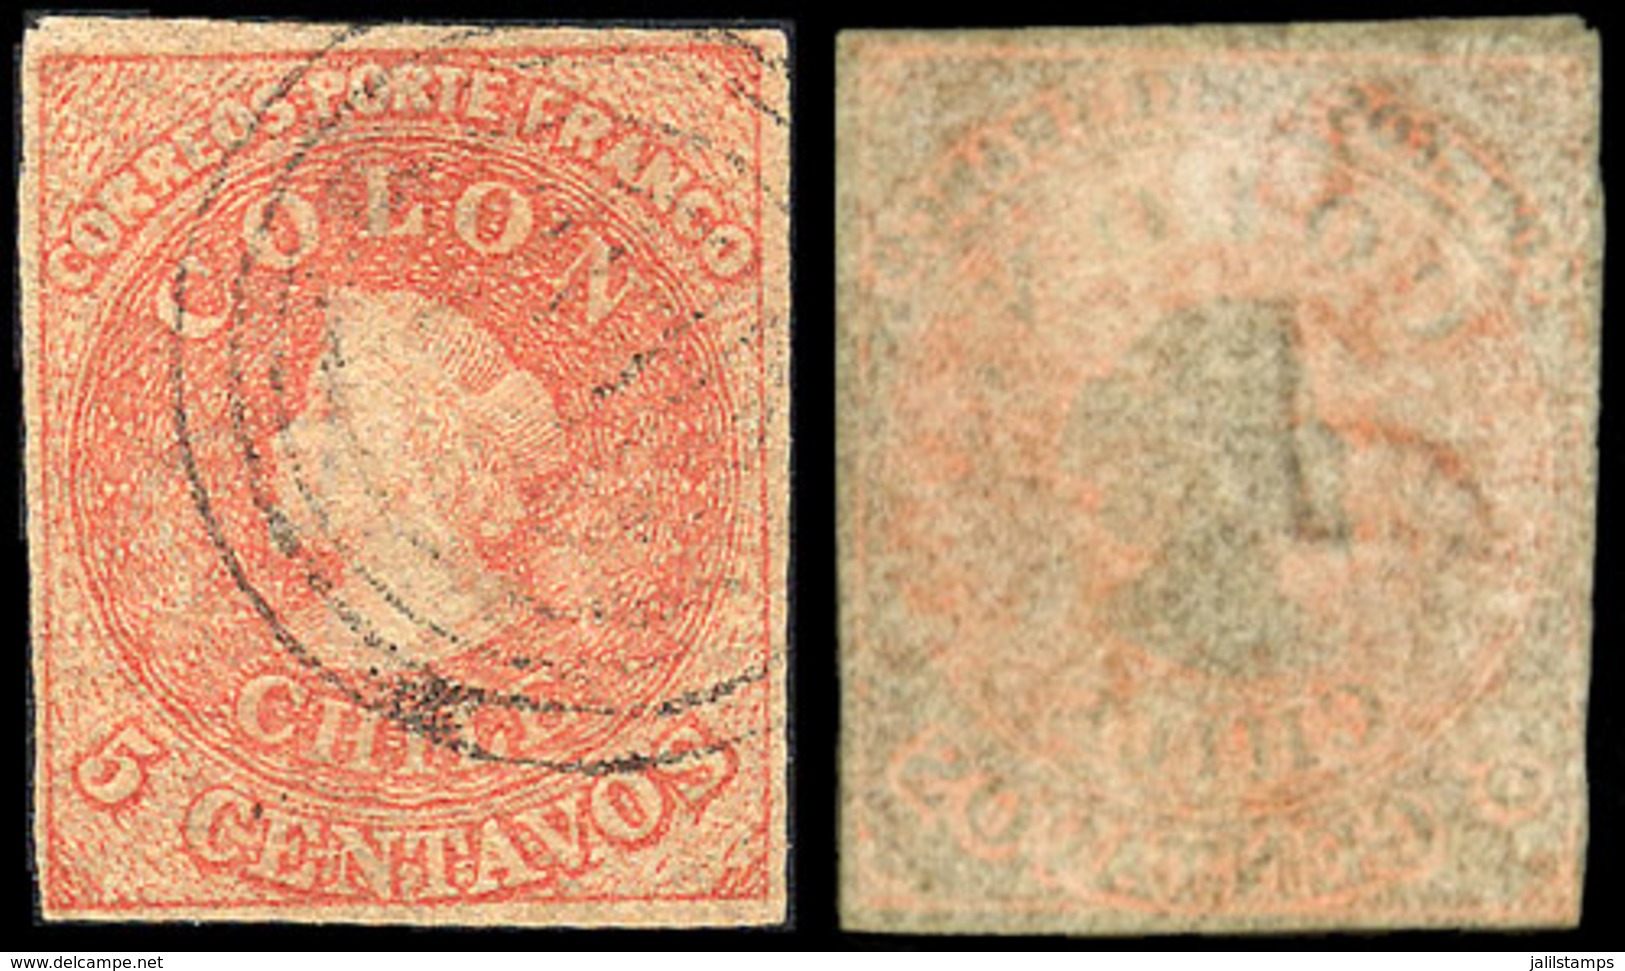 CHILE: Sc.14, With INVERTED WATERMARK Variety, Very Nice Example! - Chile